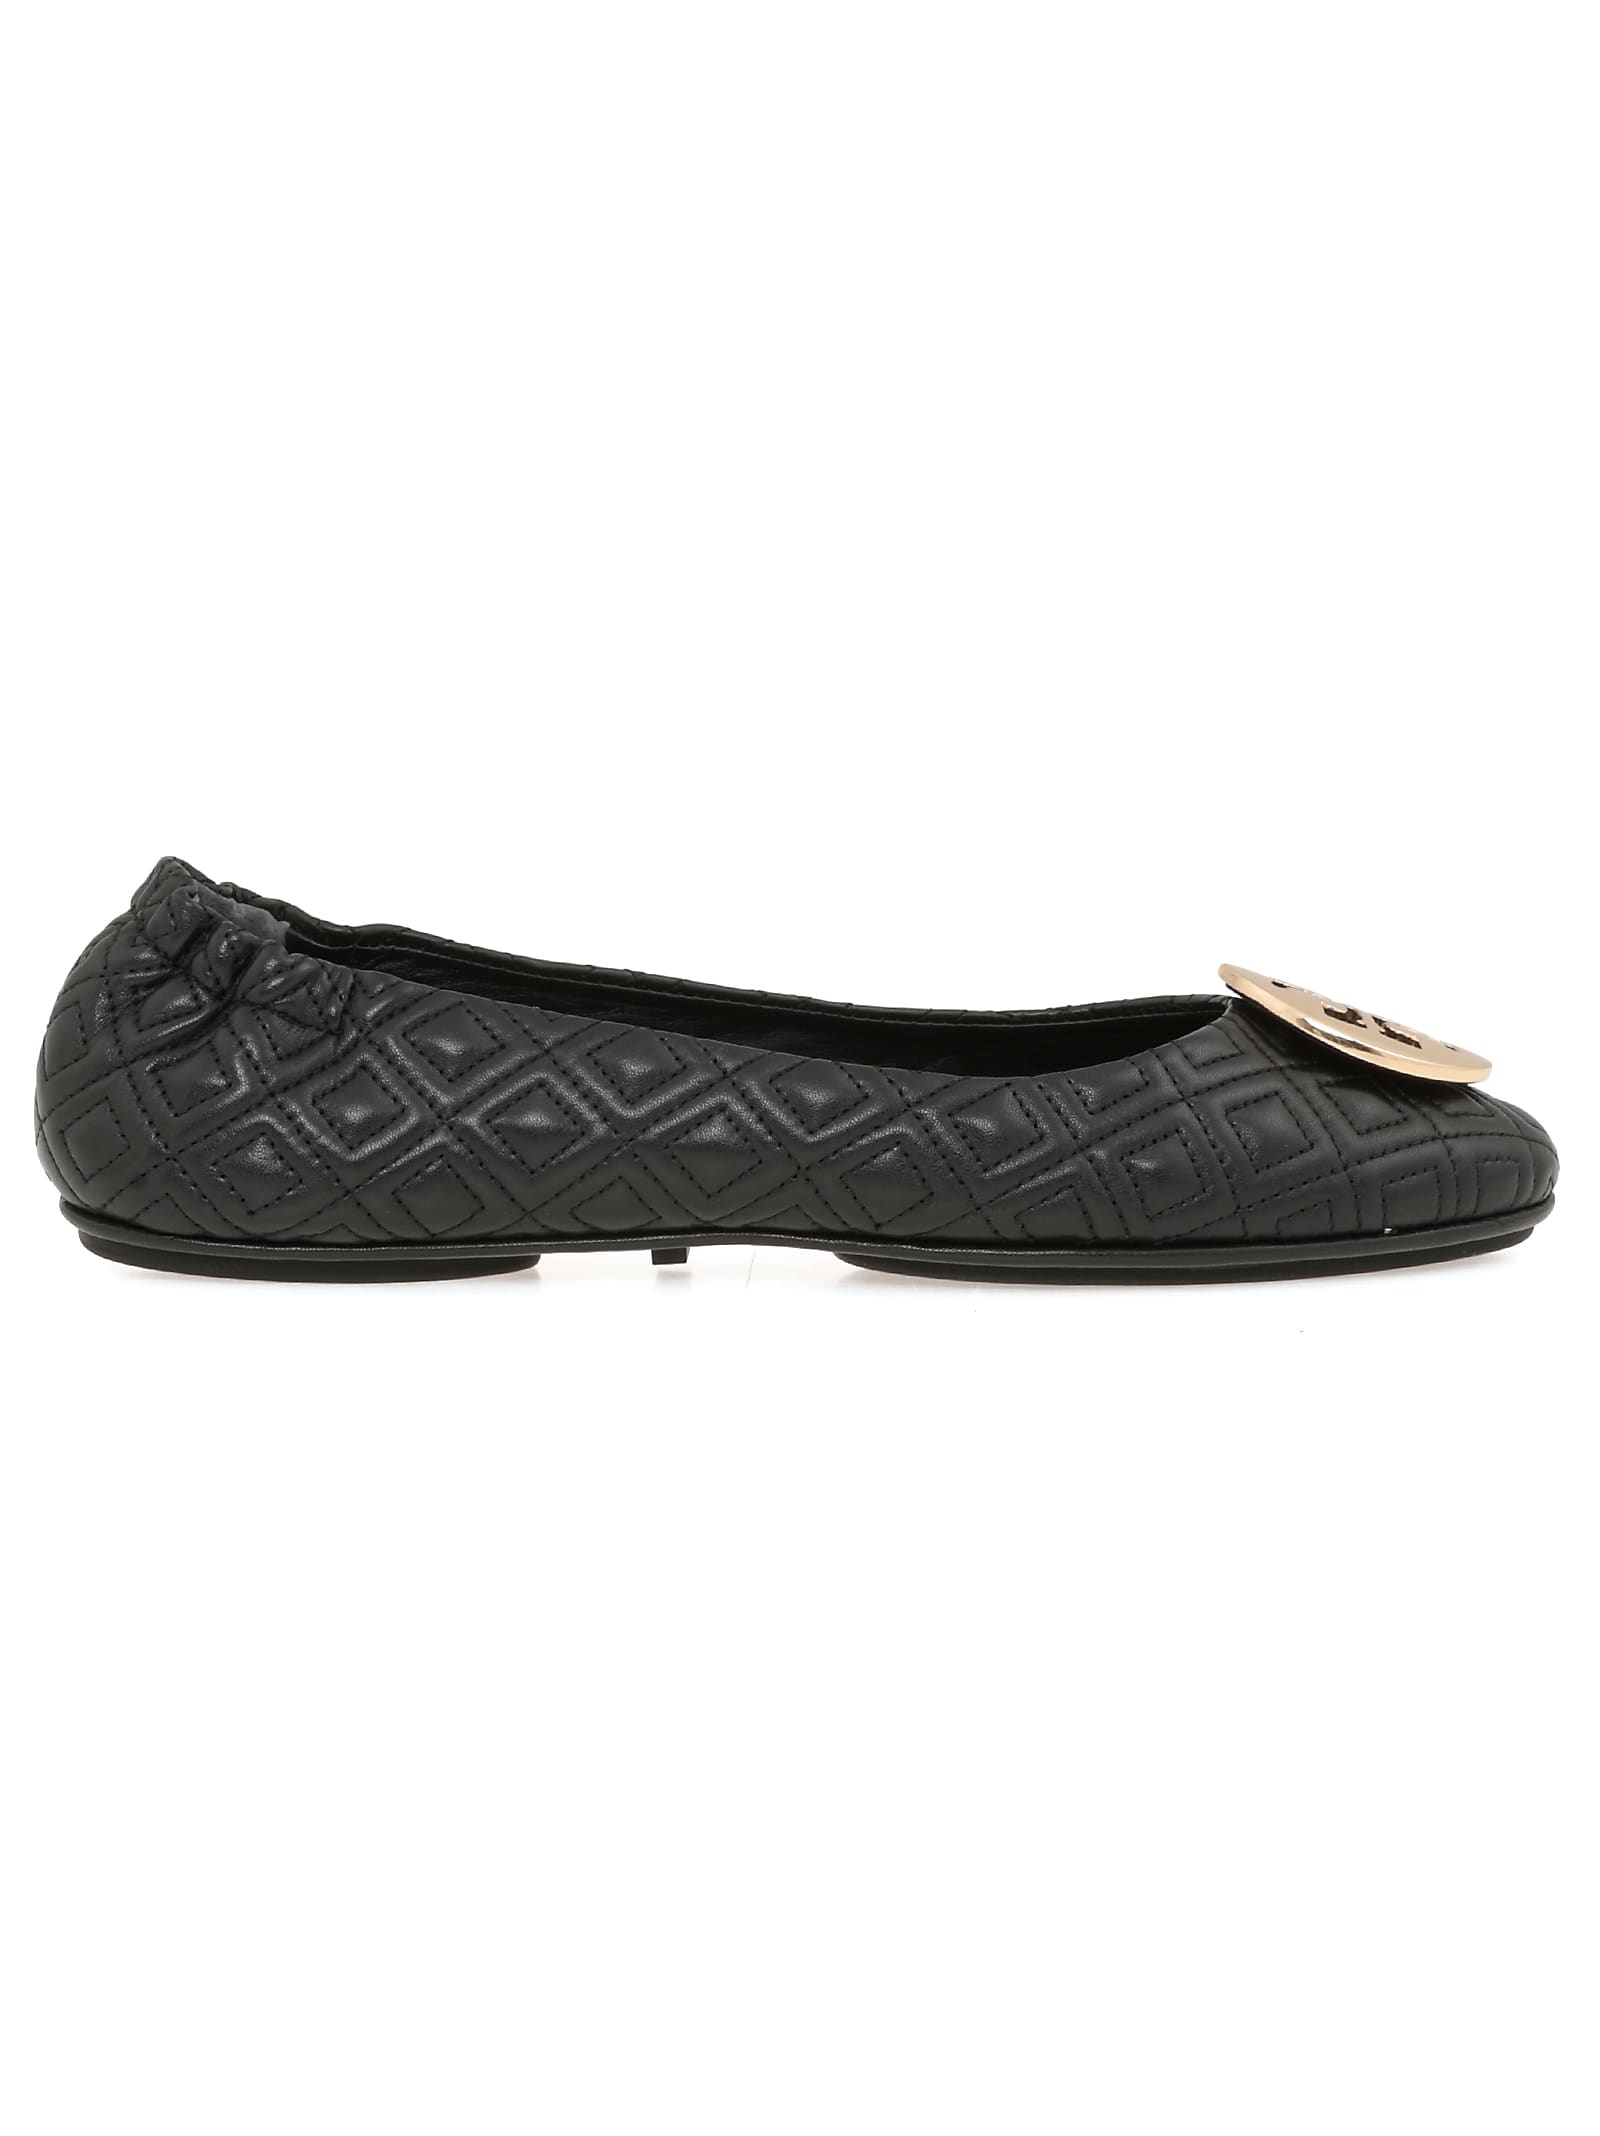 Photo of  Tory Burch Quilted Minnie Ballet Flat- shop Tory Burch Flats online sales